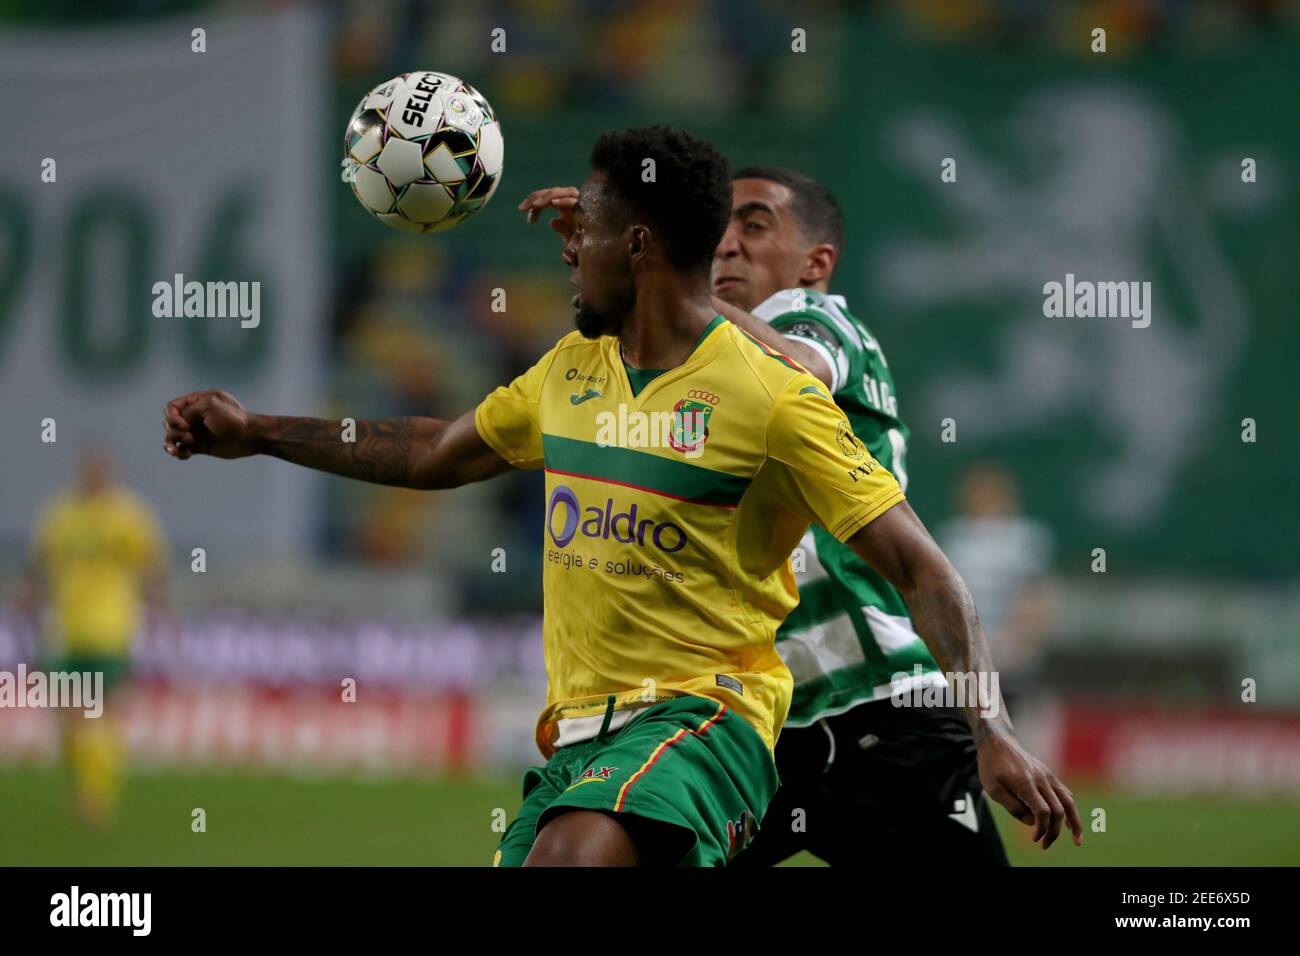 Lisbon, Portugal. 15th Feb, 2021. Maracas of FC Pacos Ferreira (L) vies with Tiago Tomas of Sporting CP during the Portuguese League football match between Sporting CP and FC Pacos de Ferreira at Jose Alvalade stadium in Lisbon, Portugal on February 15, 2021. Credit: Pedro Fiuza/ZUMA Wire/Alamy Live News Stock Photo